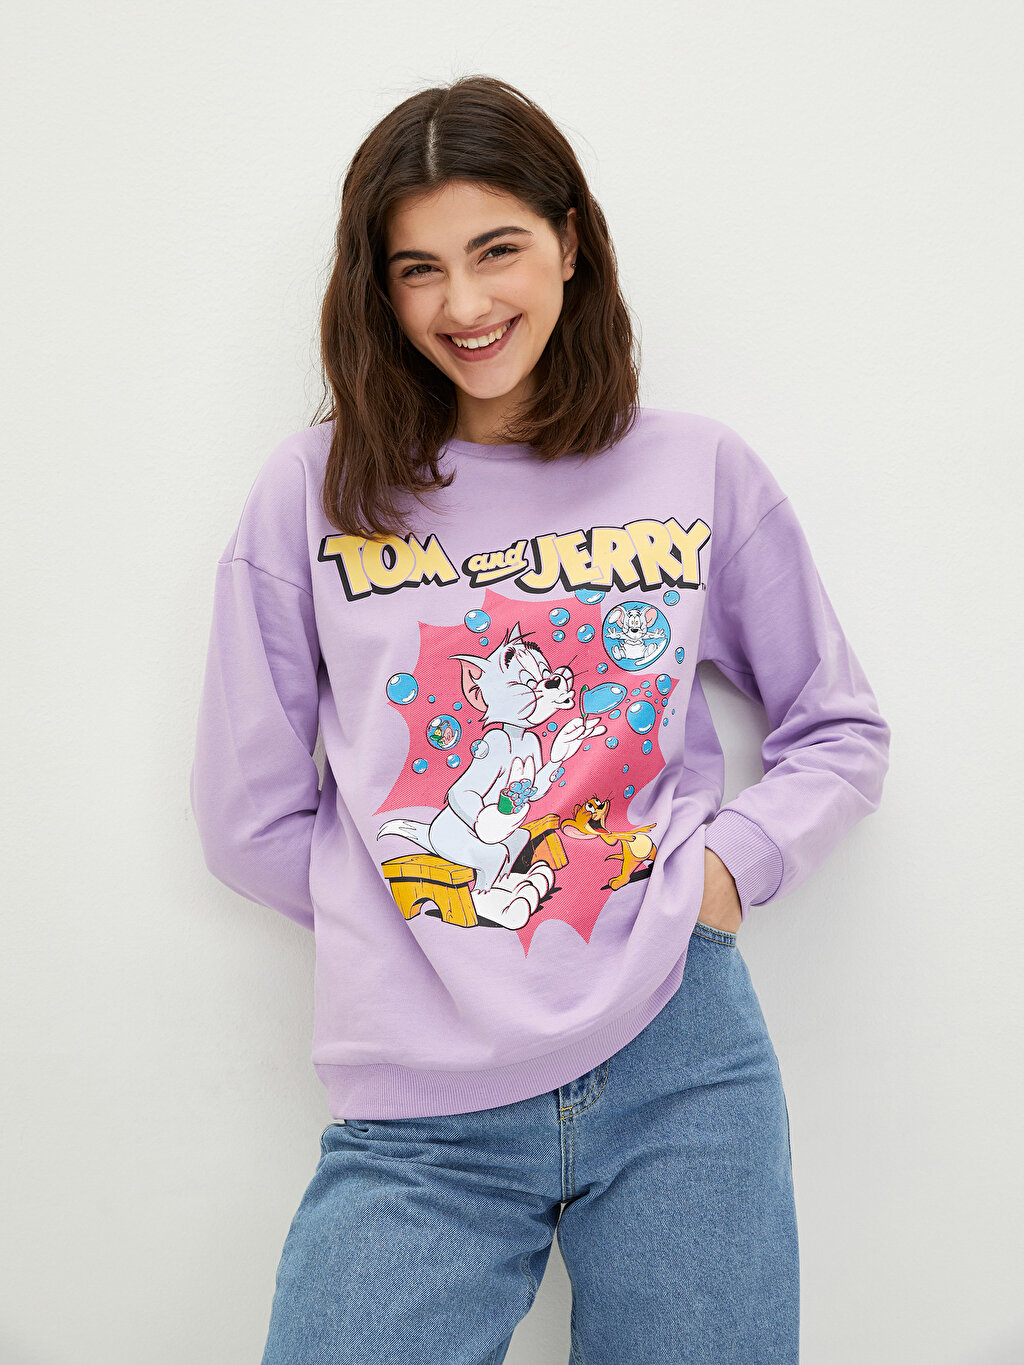 LCW CASUAL Crew Neck Tom and Jerry Printed Long Sleeve Women's Sweatshirt  -W1IC08Z8-G3W - W1IC08Z8-G3W - LC Waikiki